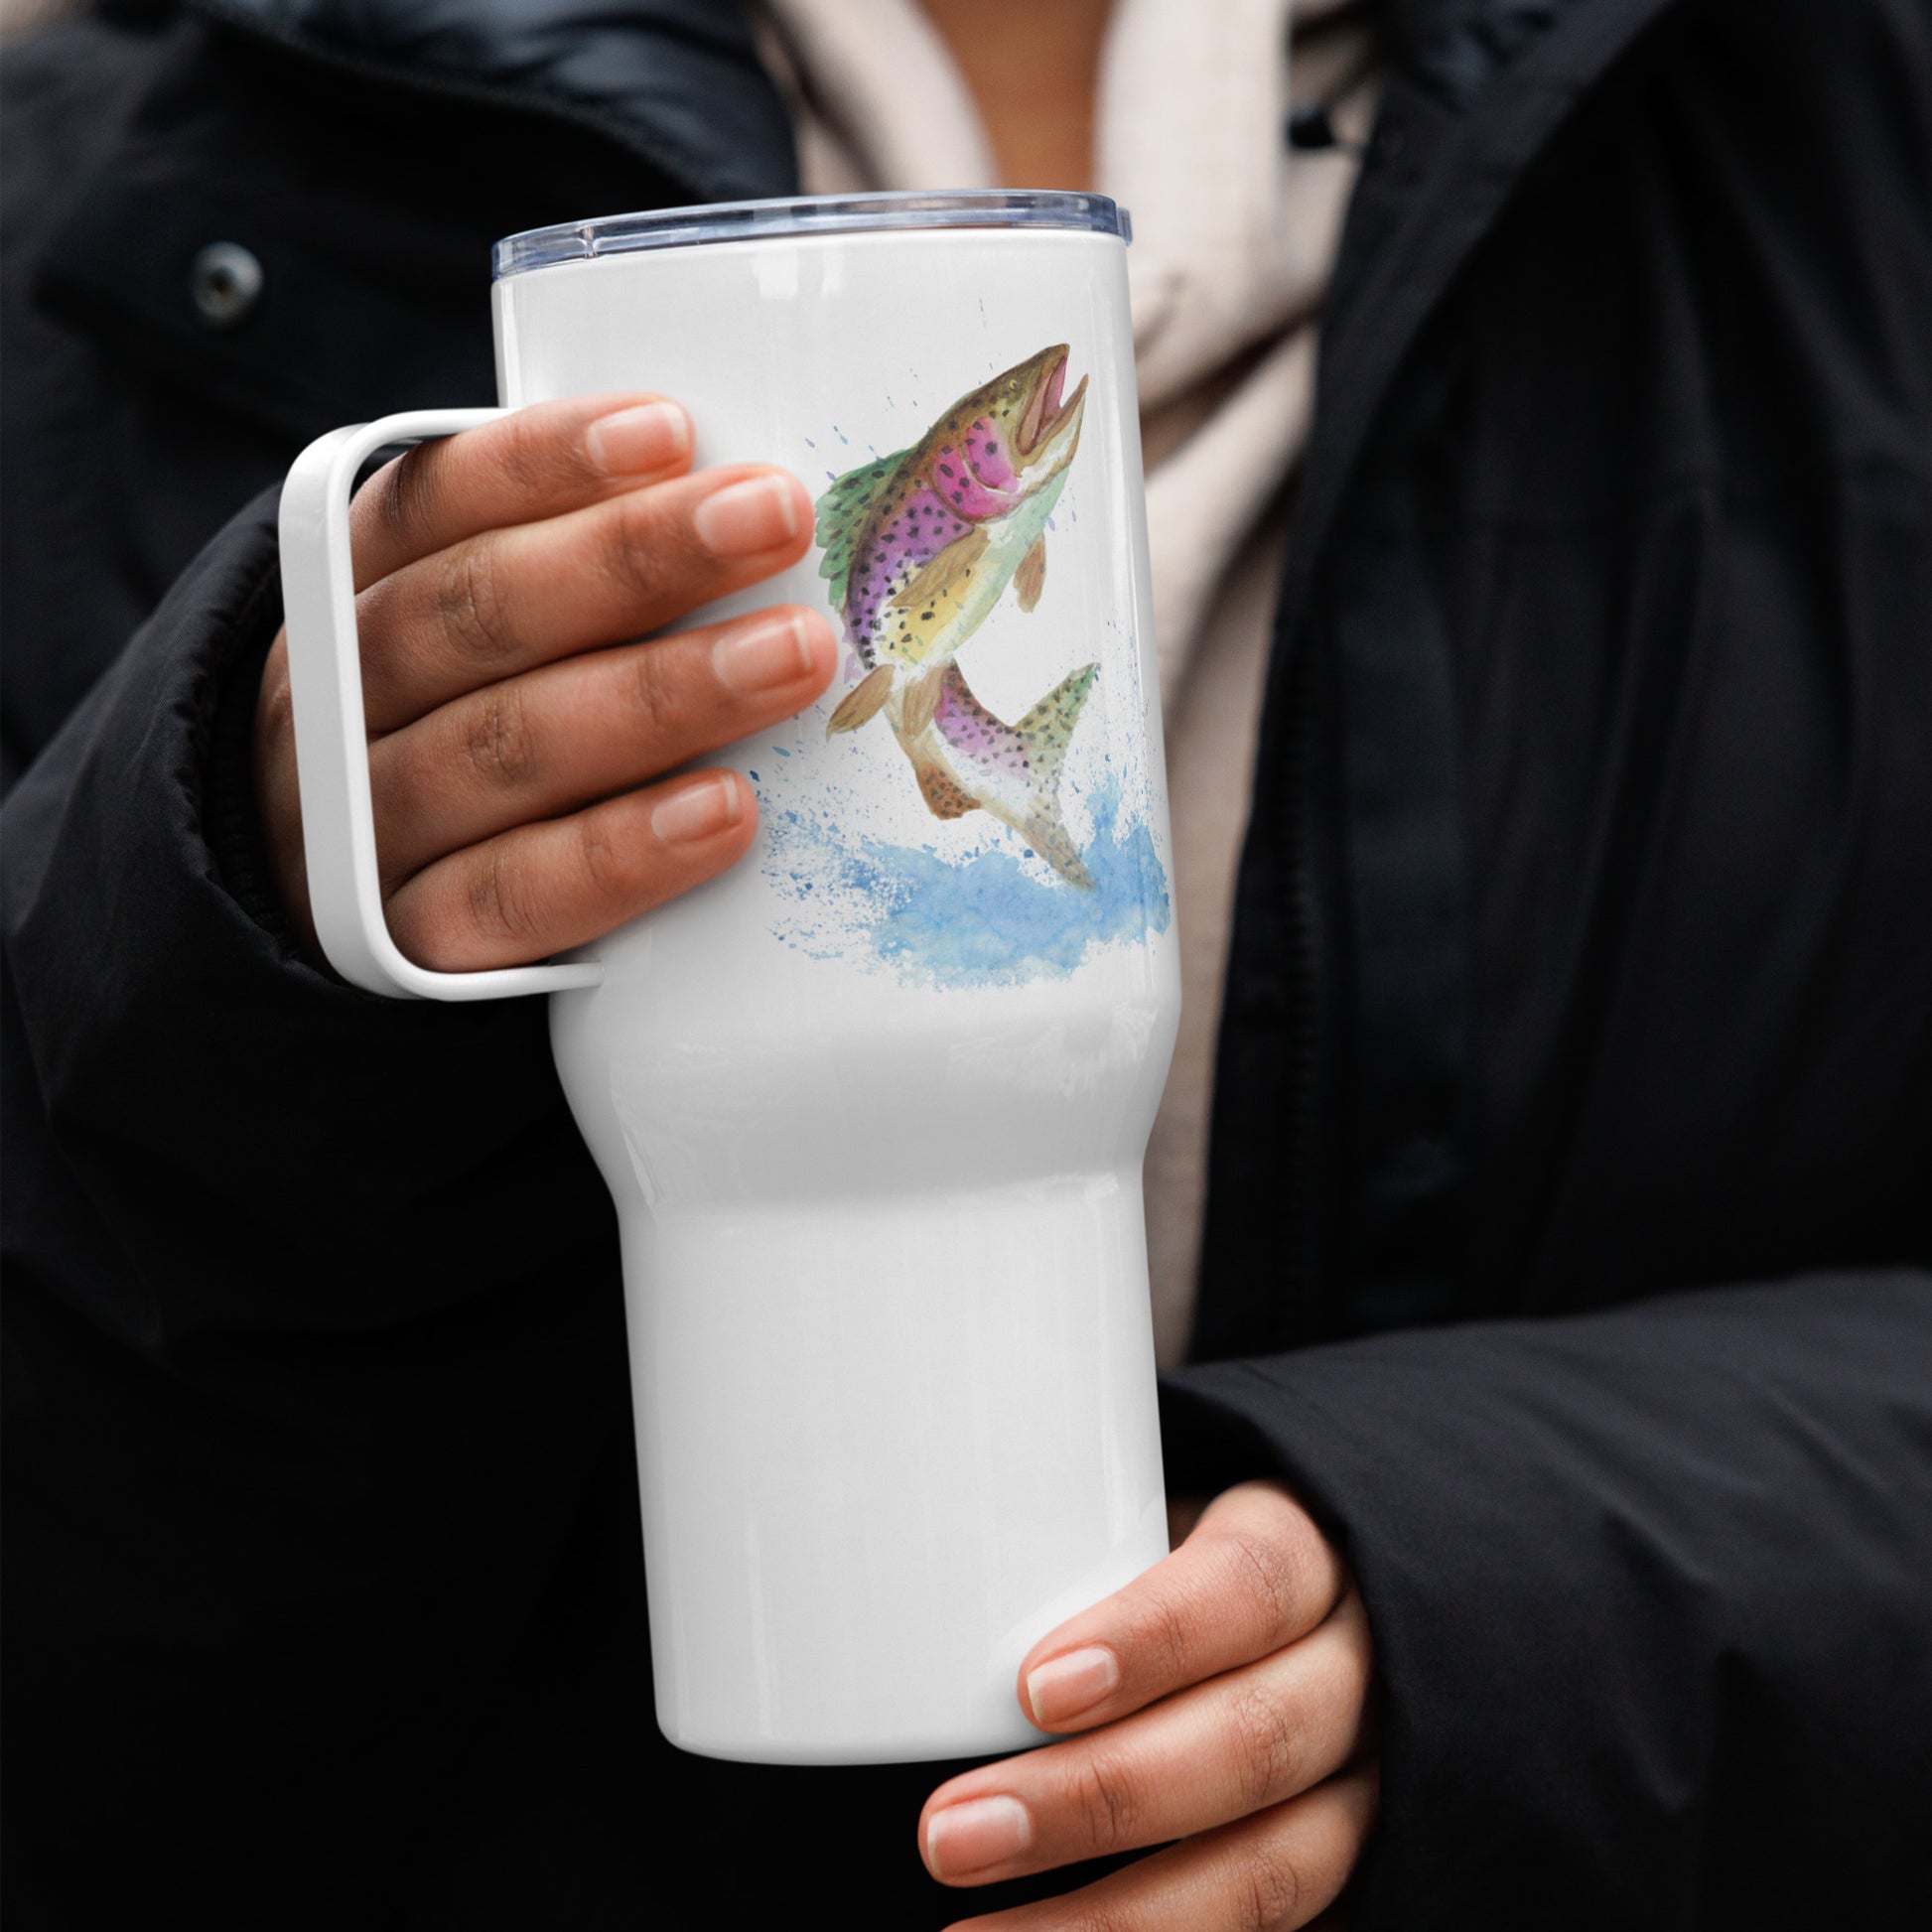 Stainless steel travel mug with handle. Holds 25 ounces of hot or cold drinks. Has print of watercolor rainbow trout fish on both sides. Fits most car cup holders. Comes with spill-proof BPA-free plastic lid. Shown in model's hands.